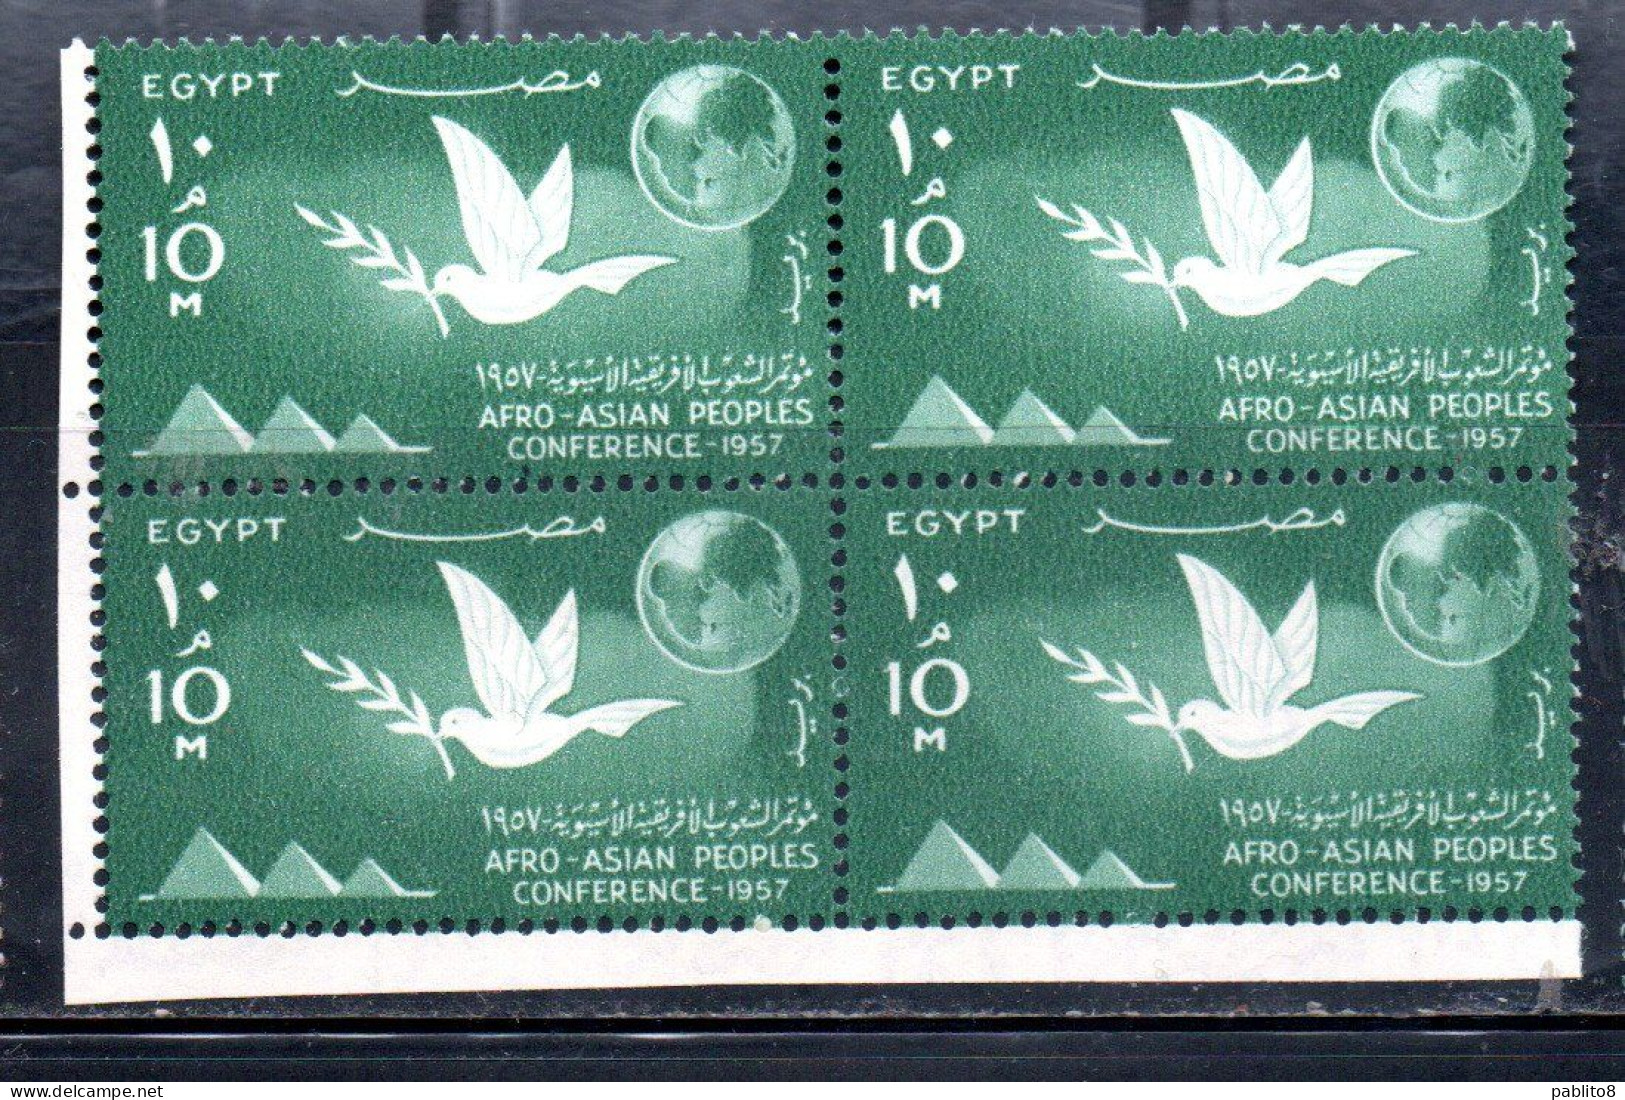 UAR EGYPT EGITTO 1957 AFRO-ASIAN PEOPLES CONFERENCE CAIRO PYRAMIDS DOVE AND GLOBE 10m MNH - Ongebruikt